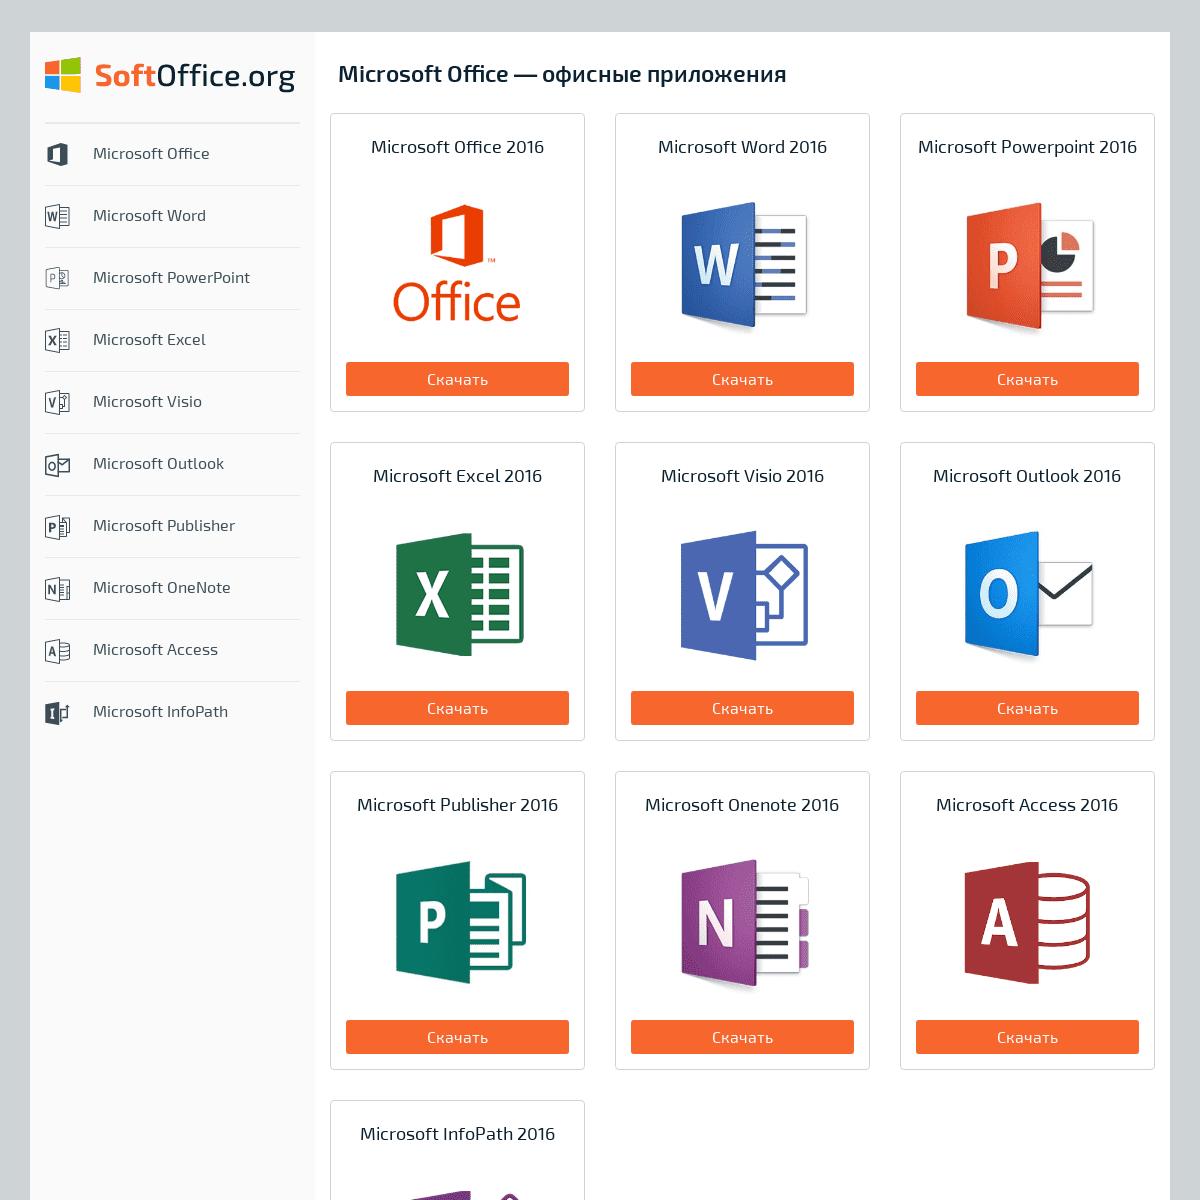 A complete backup of softoffice.org